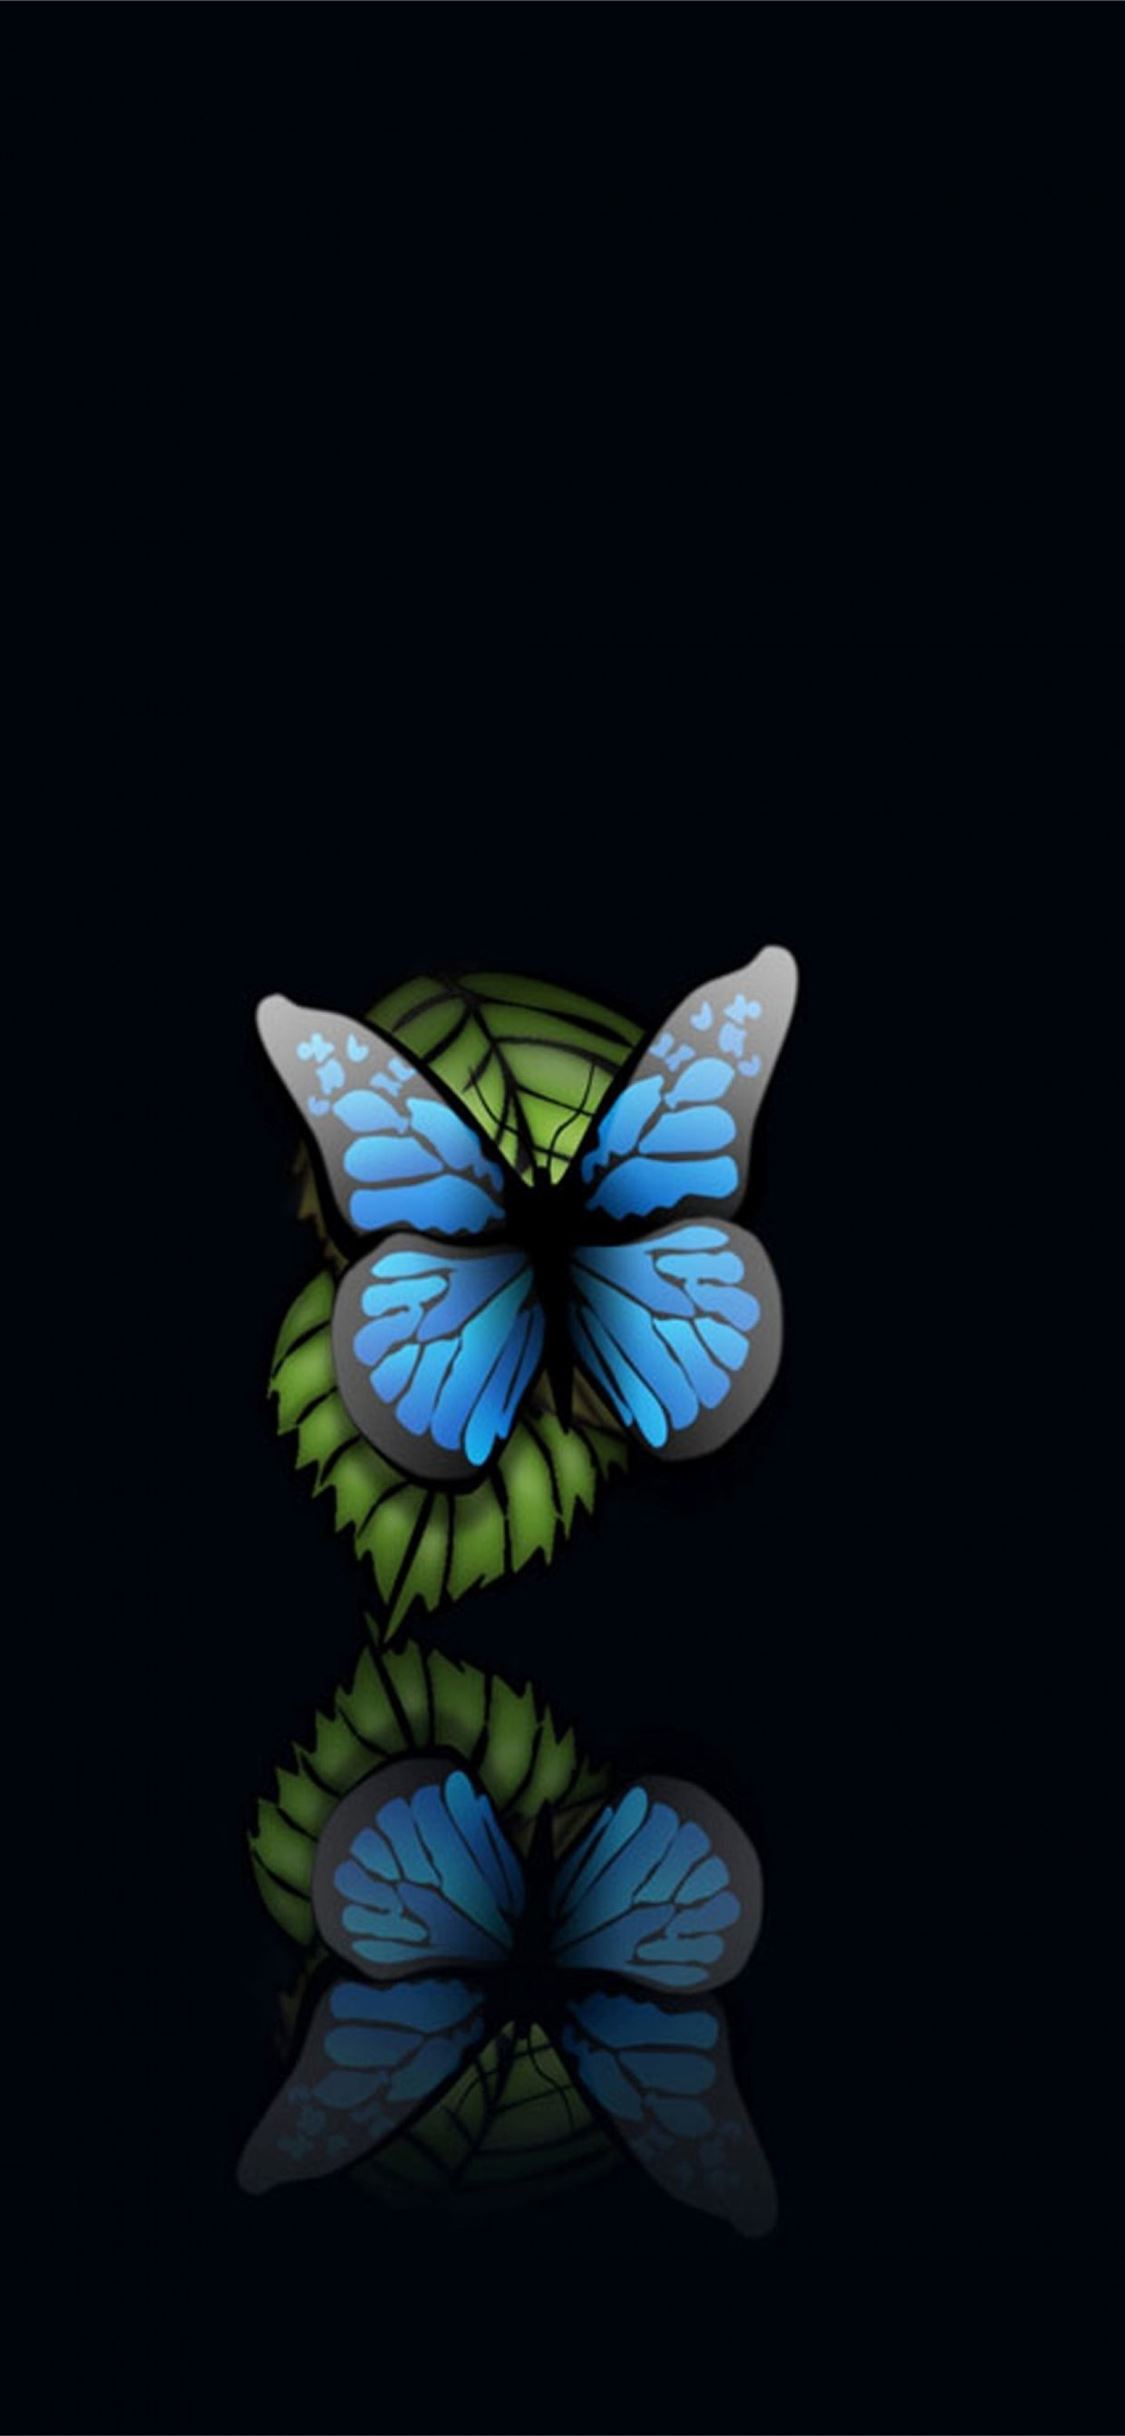 Free 75 Butterfly Hd on Play iPhone X Wallpapers Free Download